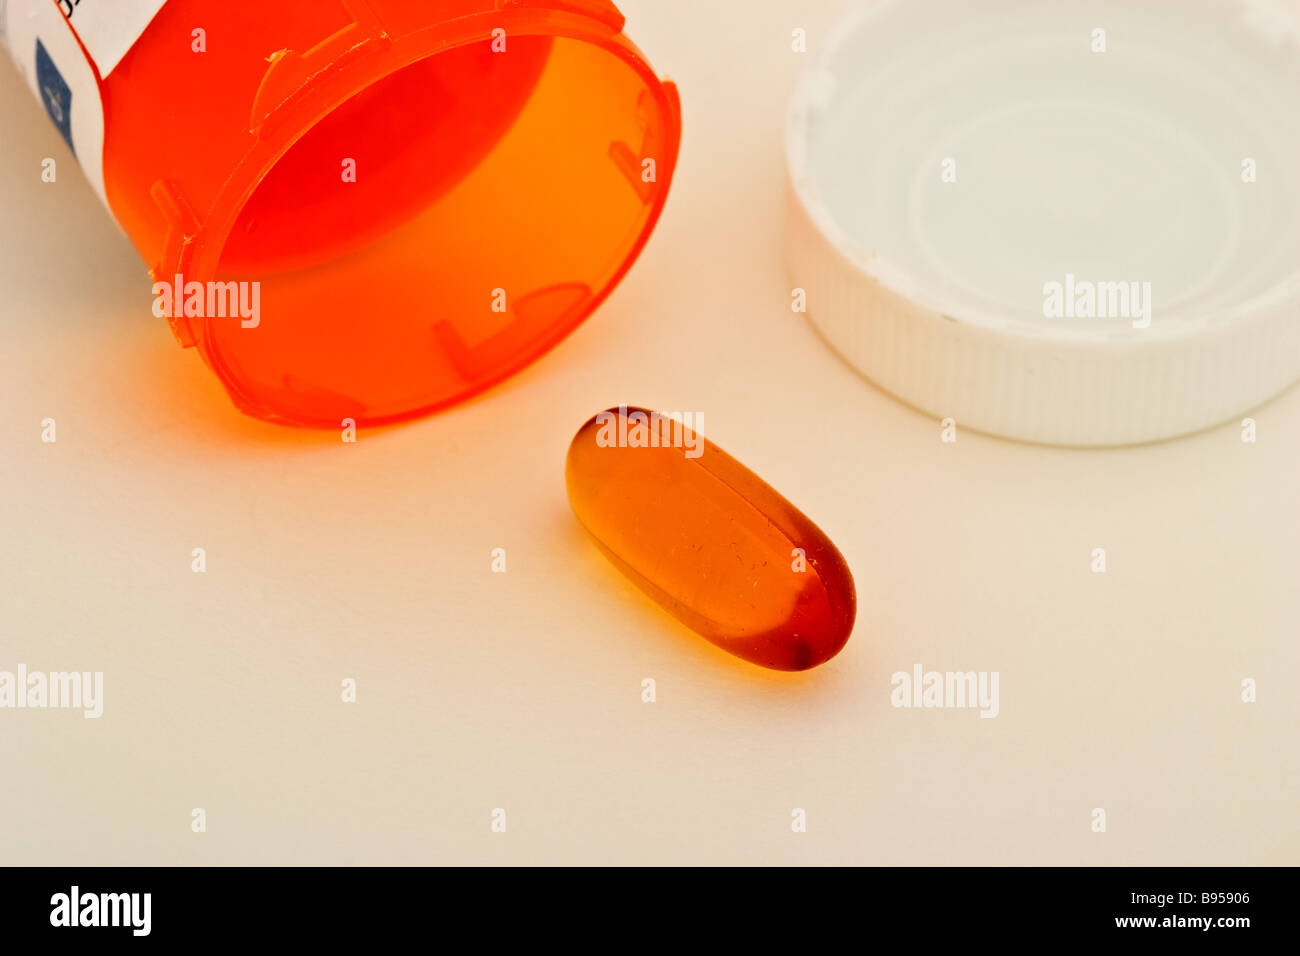 Single clear medicine capsule in front of an open empty prescription bottle and cap Stock Photo